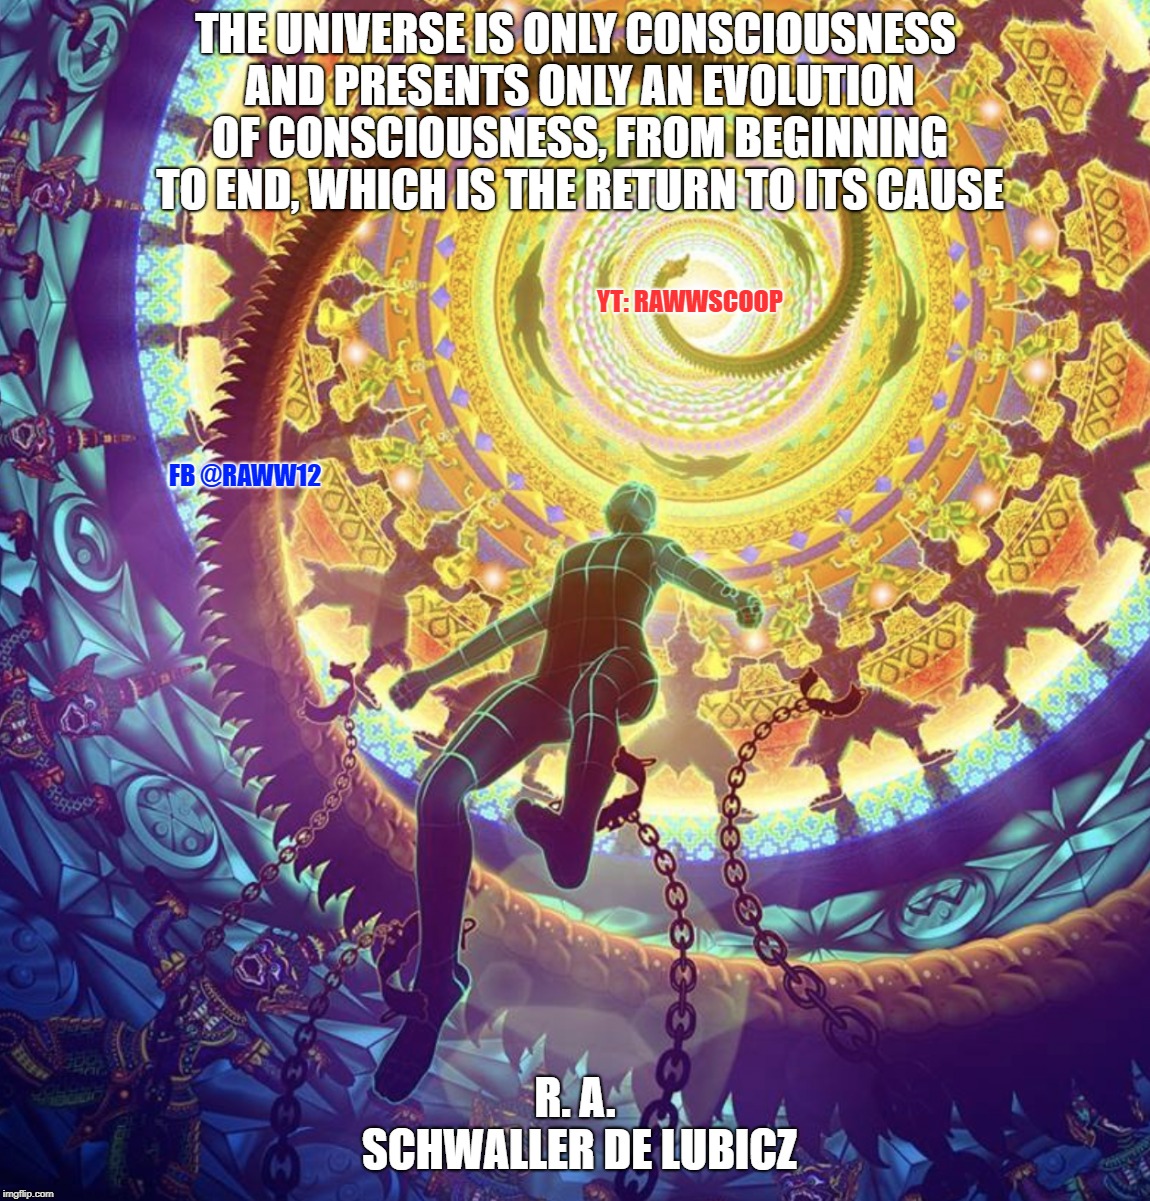 Conscious Universe | THE UNIVERSE IS ONLY CONSCIOUSNESS AND PRESENTS ONLY AN EVOLUTION OF CONSCIOUSNESS, FROM BEGINNING TO END, WHICH IS THE RETURN TO ITS CAUSE; YT: RAWWSCOOP; FB @RAWW12; R. A. SCHWALLER DE LUBICZ | image tagged in conscious universe | made w/ Imgflip meme maker